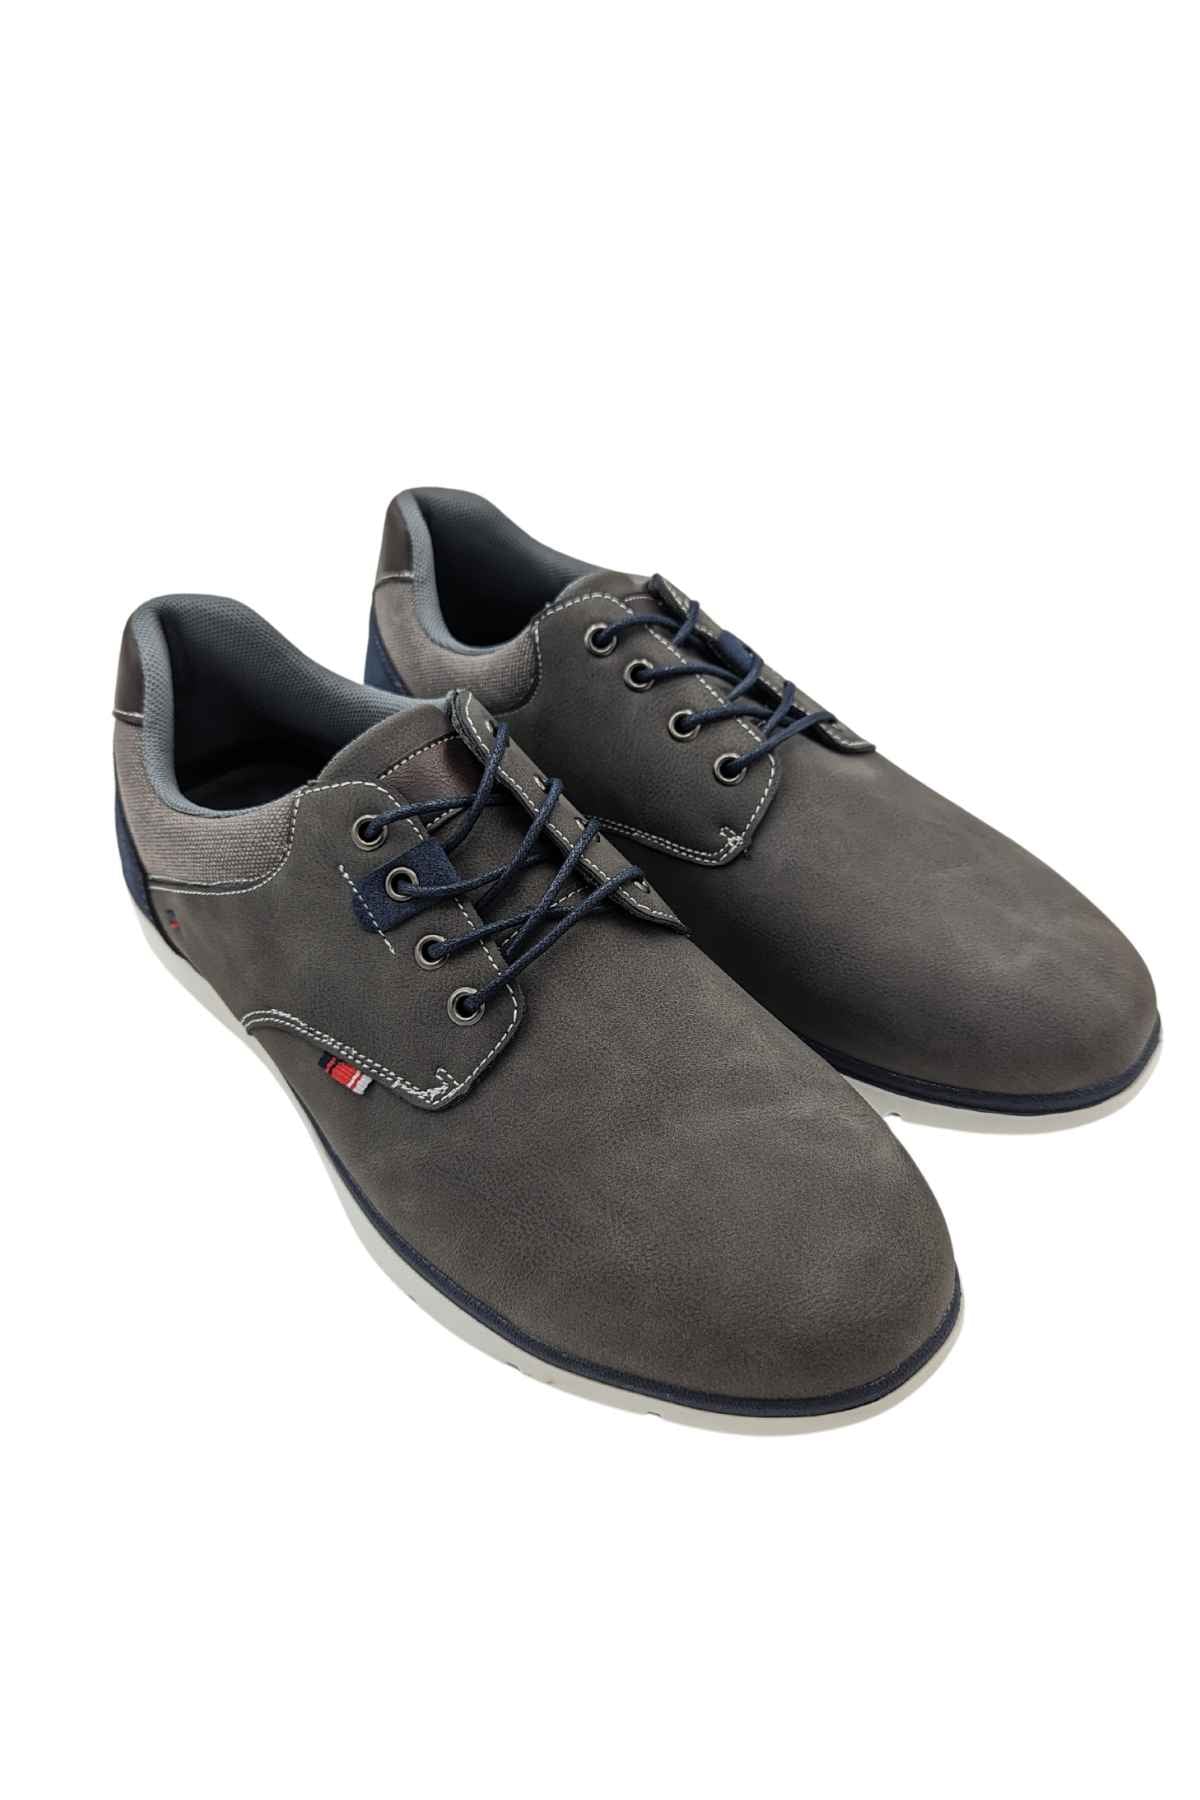 Dolphin Grey Lace Up Shoe